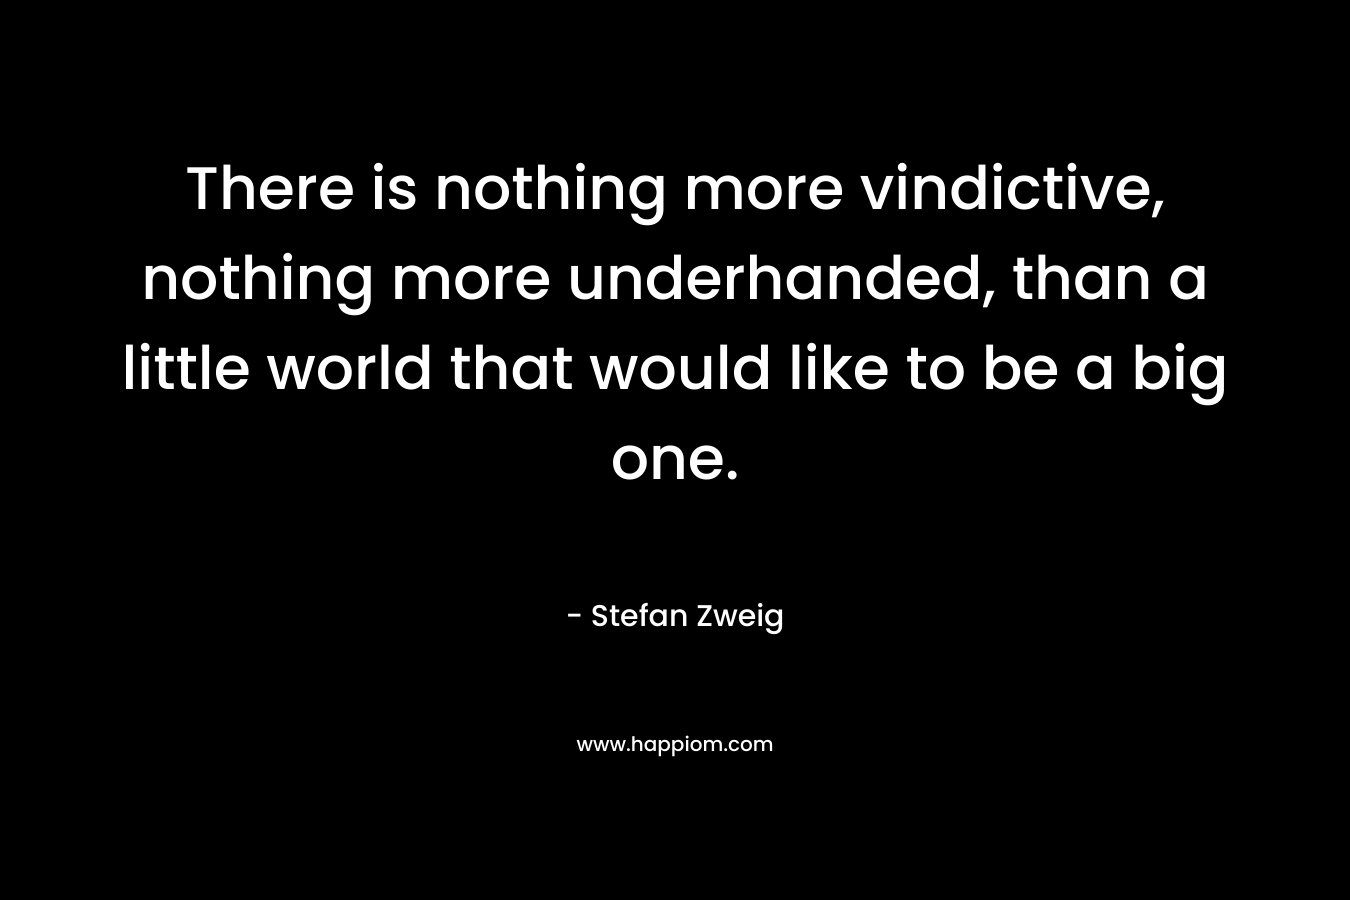 There is nothing more vindictive, nothing more underhanded, than a little world that would like to be a big one. – Stefan Zweig